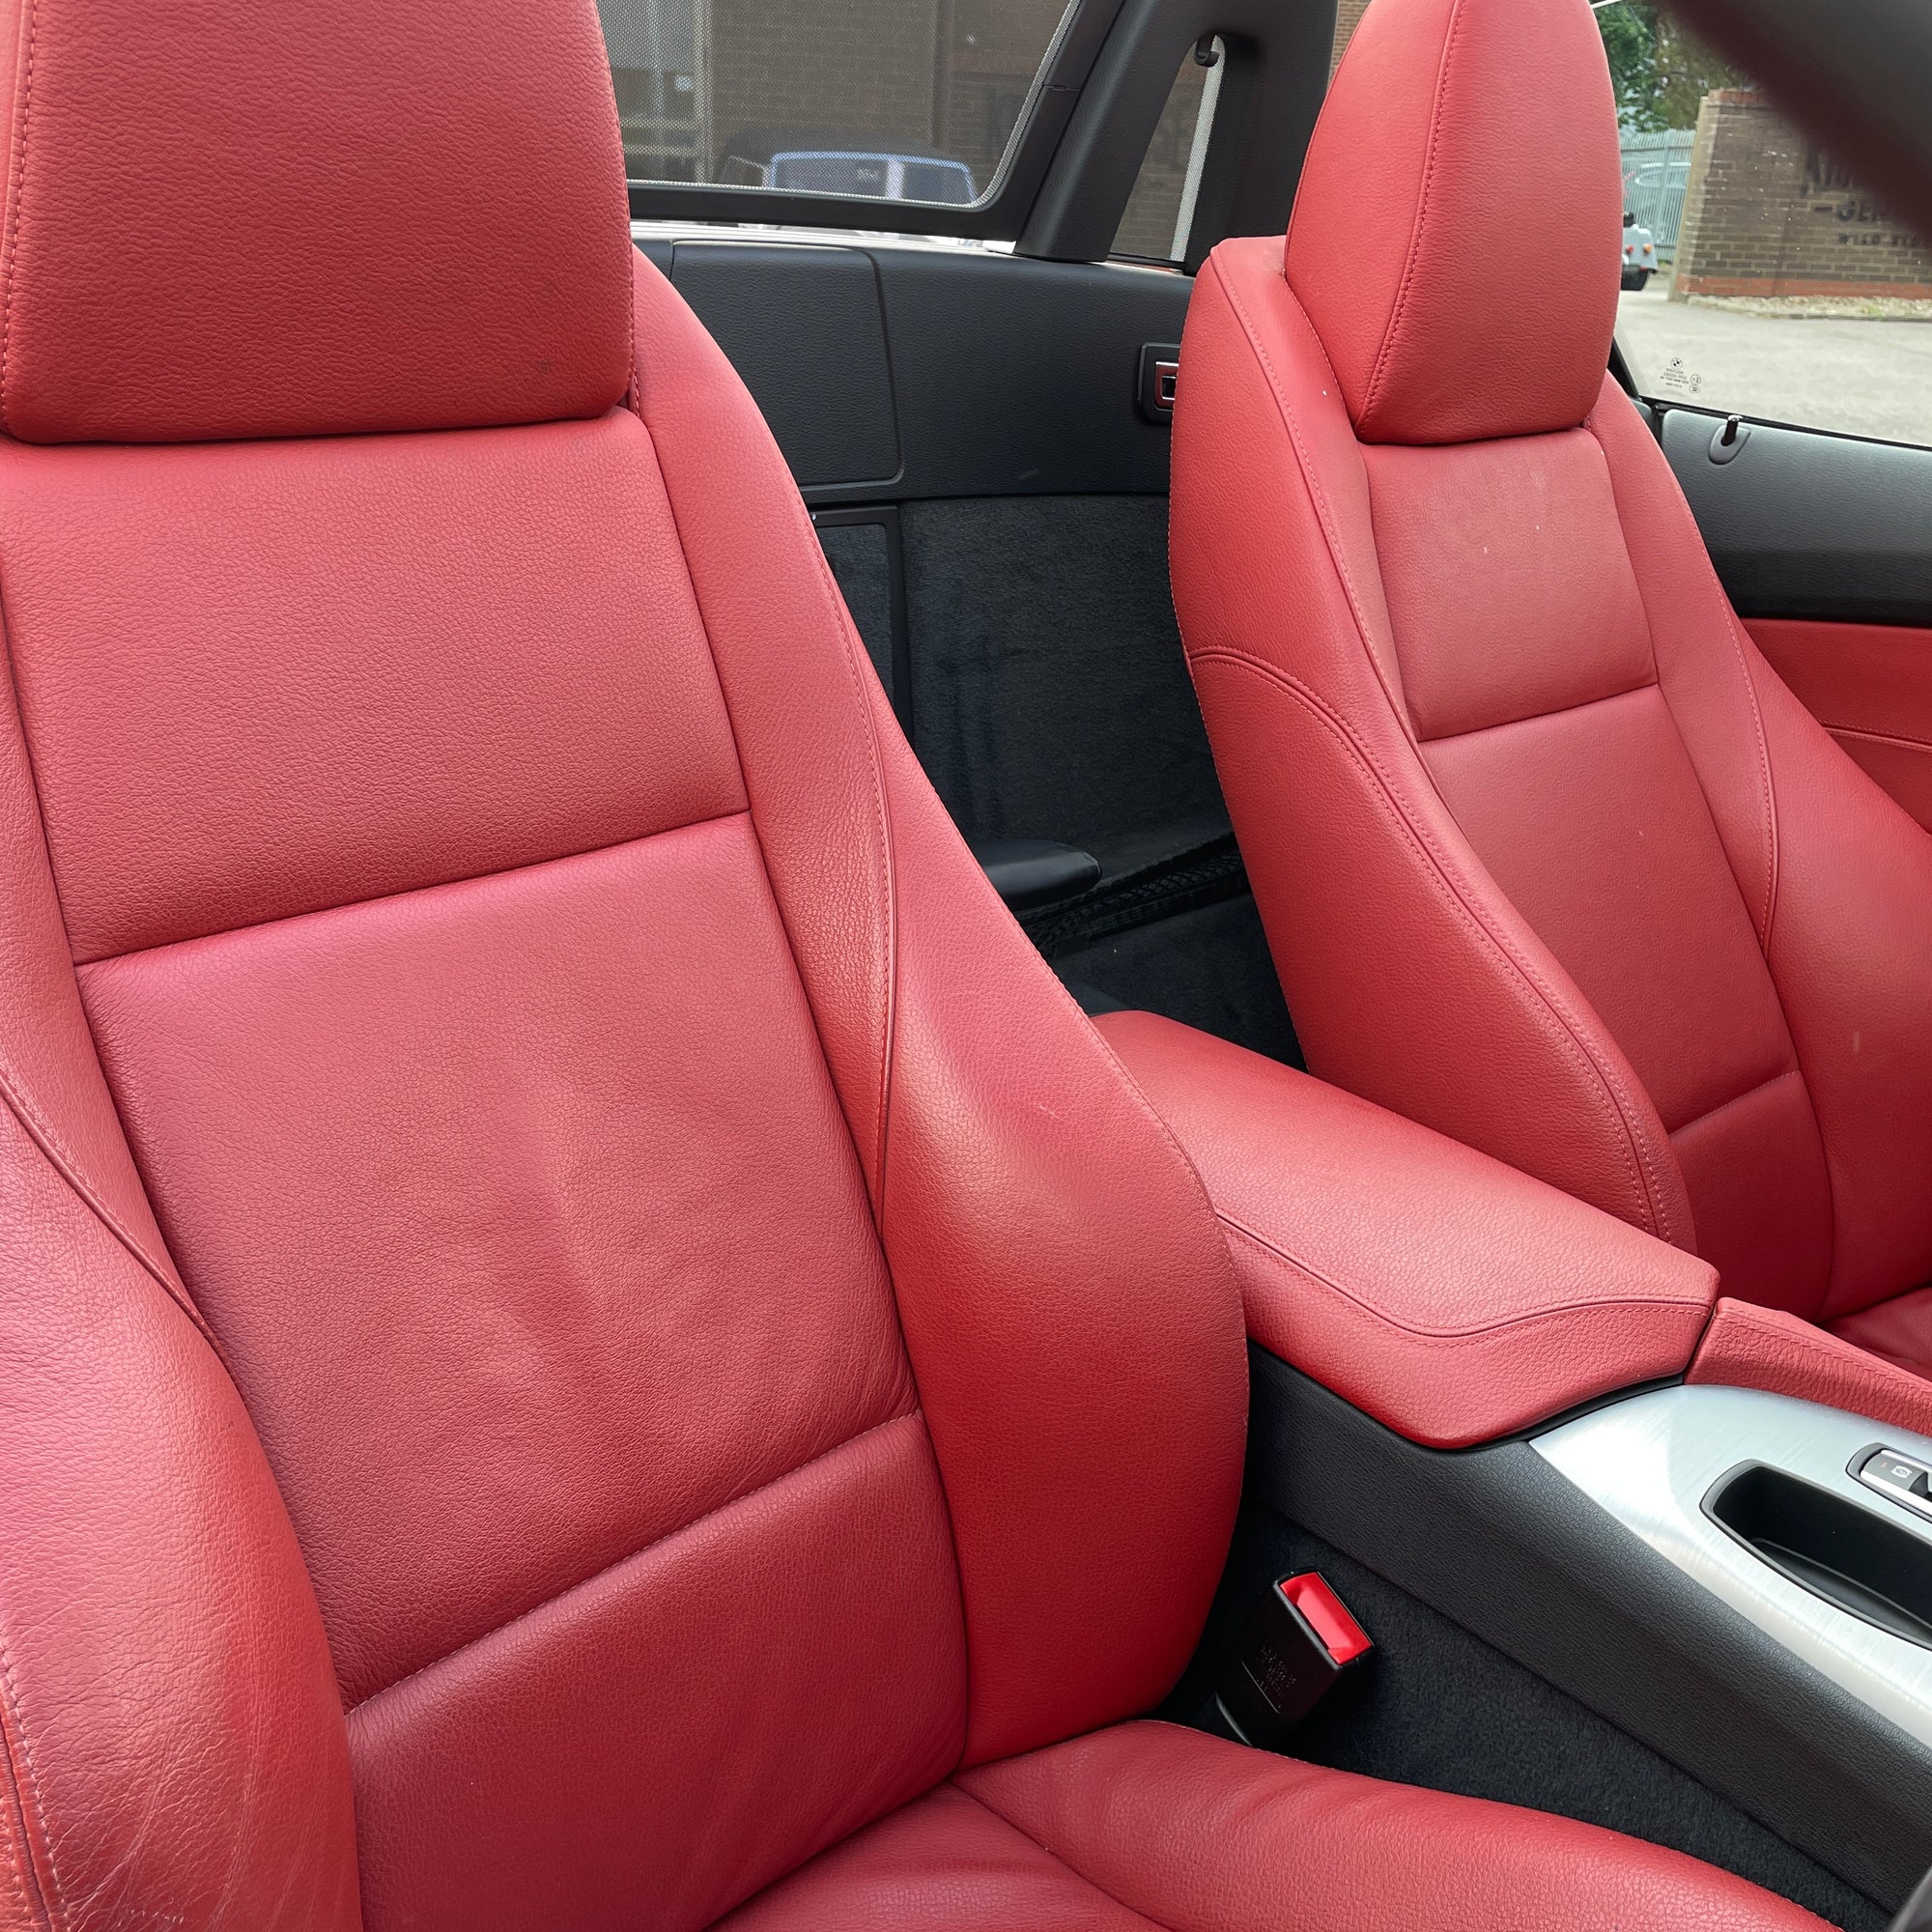 BMW Z4 Car Seat Covers  Custom Car Seat Covers for BMW Z4 - Car Mats UK